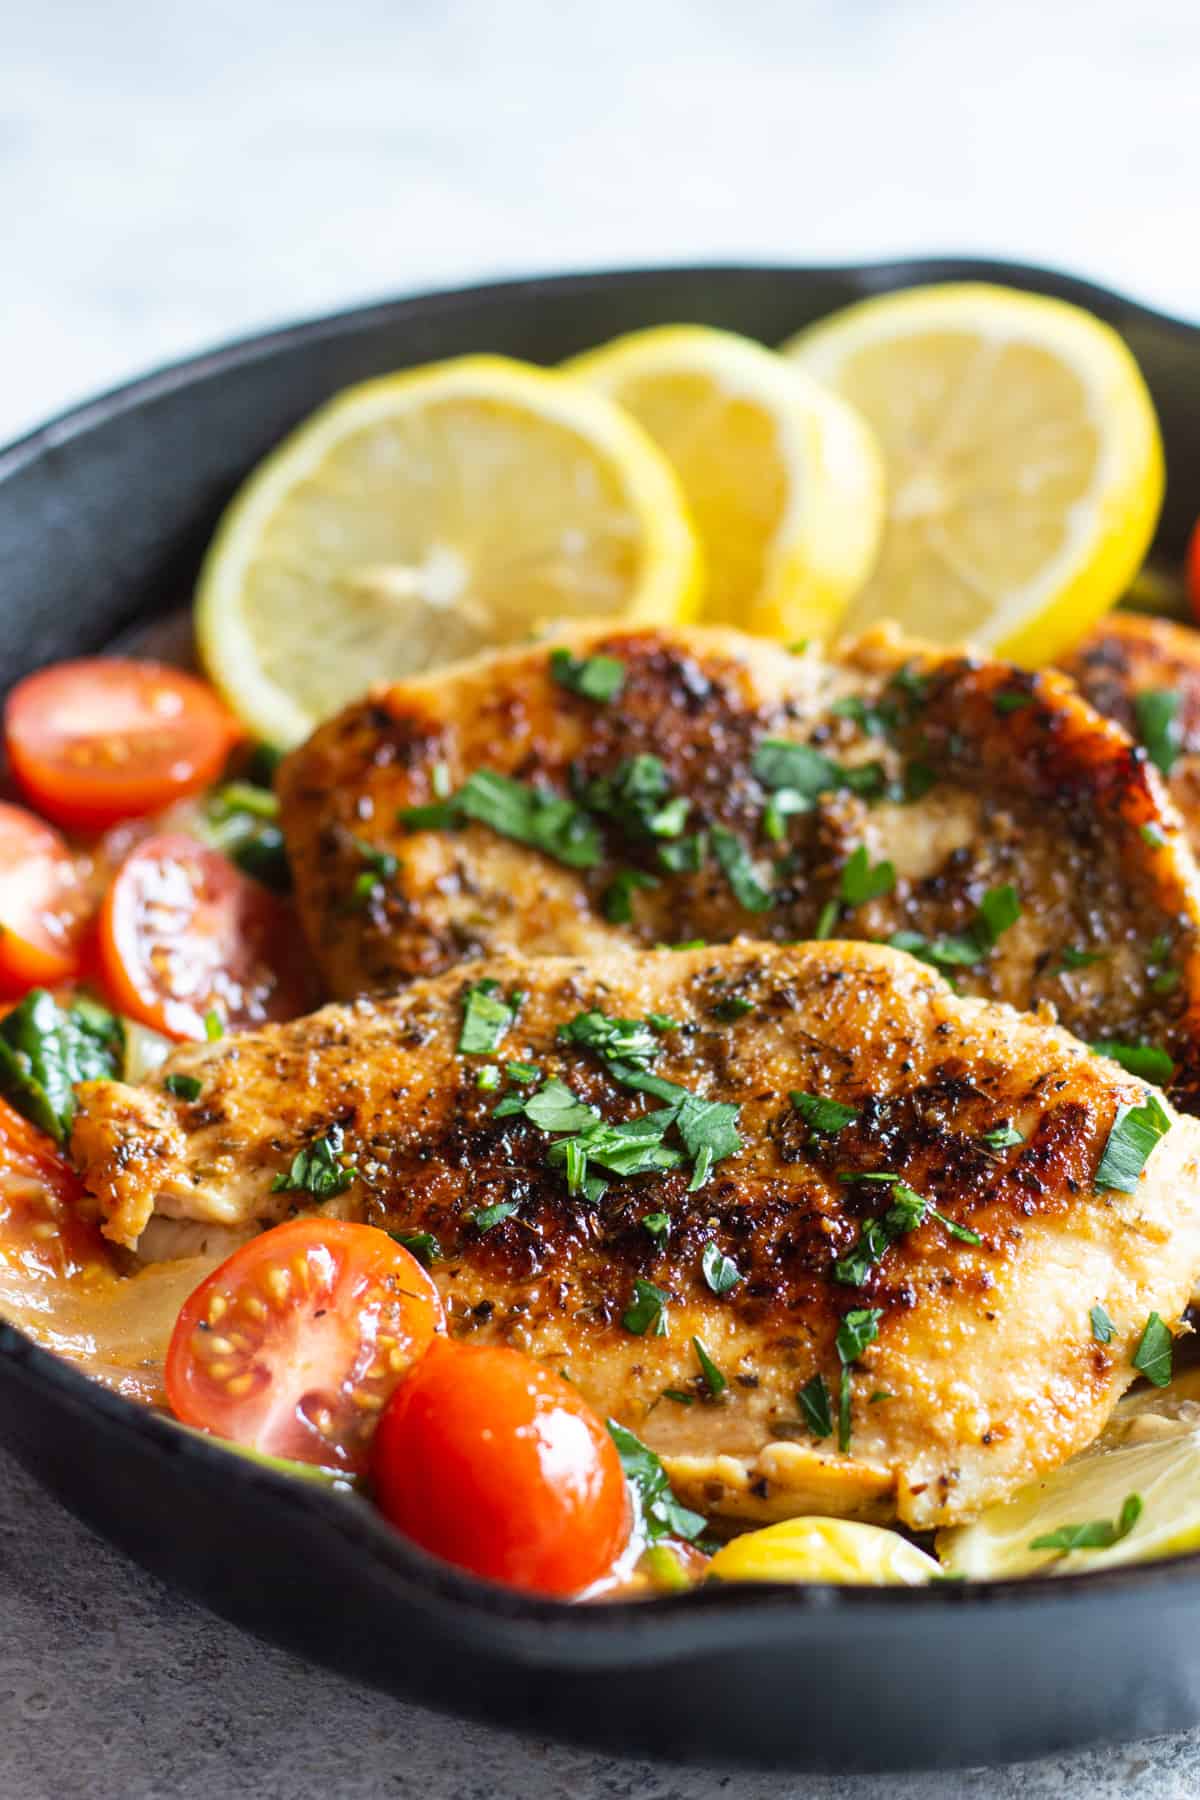 easy healthy dinner ideas - Ready in 30 minutes, this Italian chicken skillet recipe is a great option for a healthy and comforting dinner. This is a simple skillet chicken recipe that calls for real ingredients and is seasoned with bright spices and lemon.
